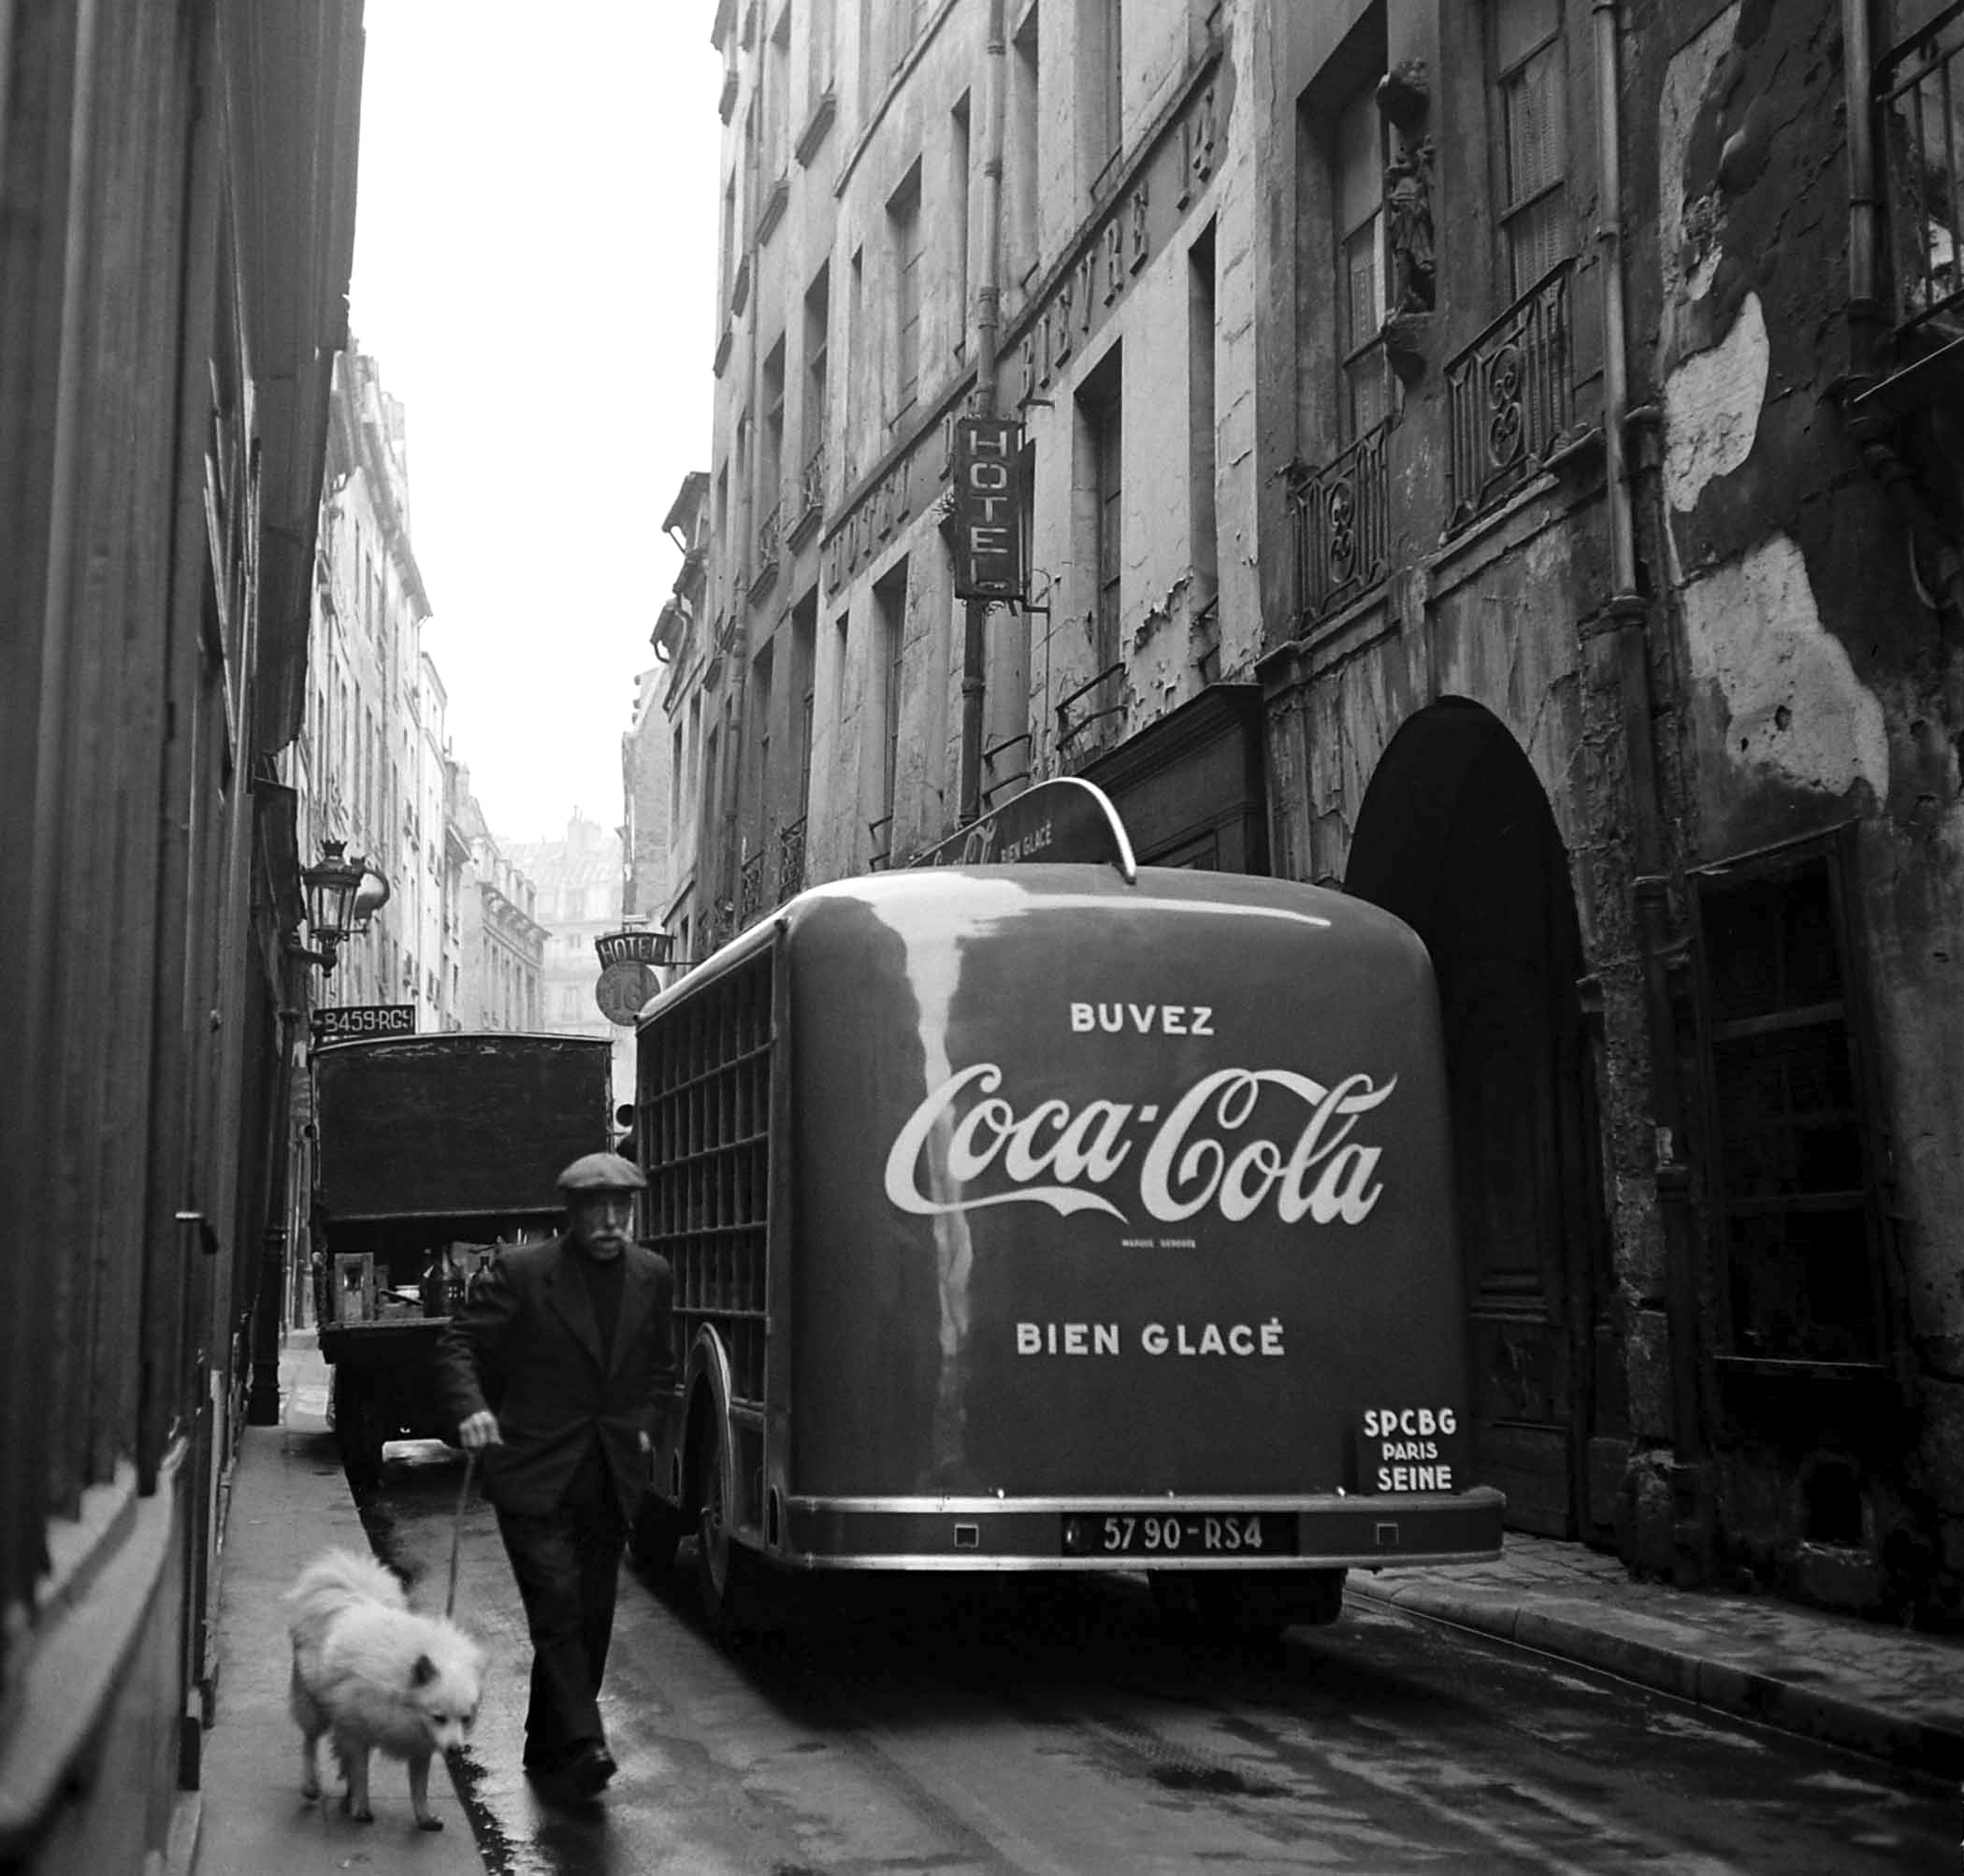 A Coke truck makes its rounds in 1950 France.